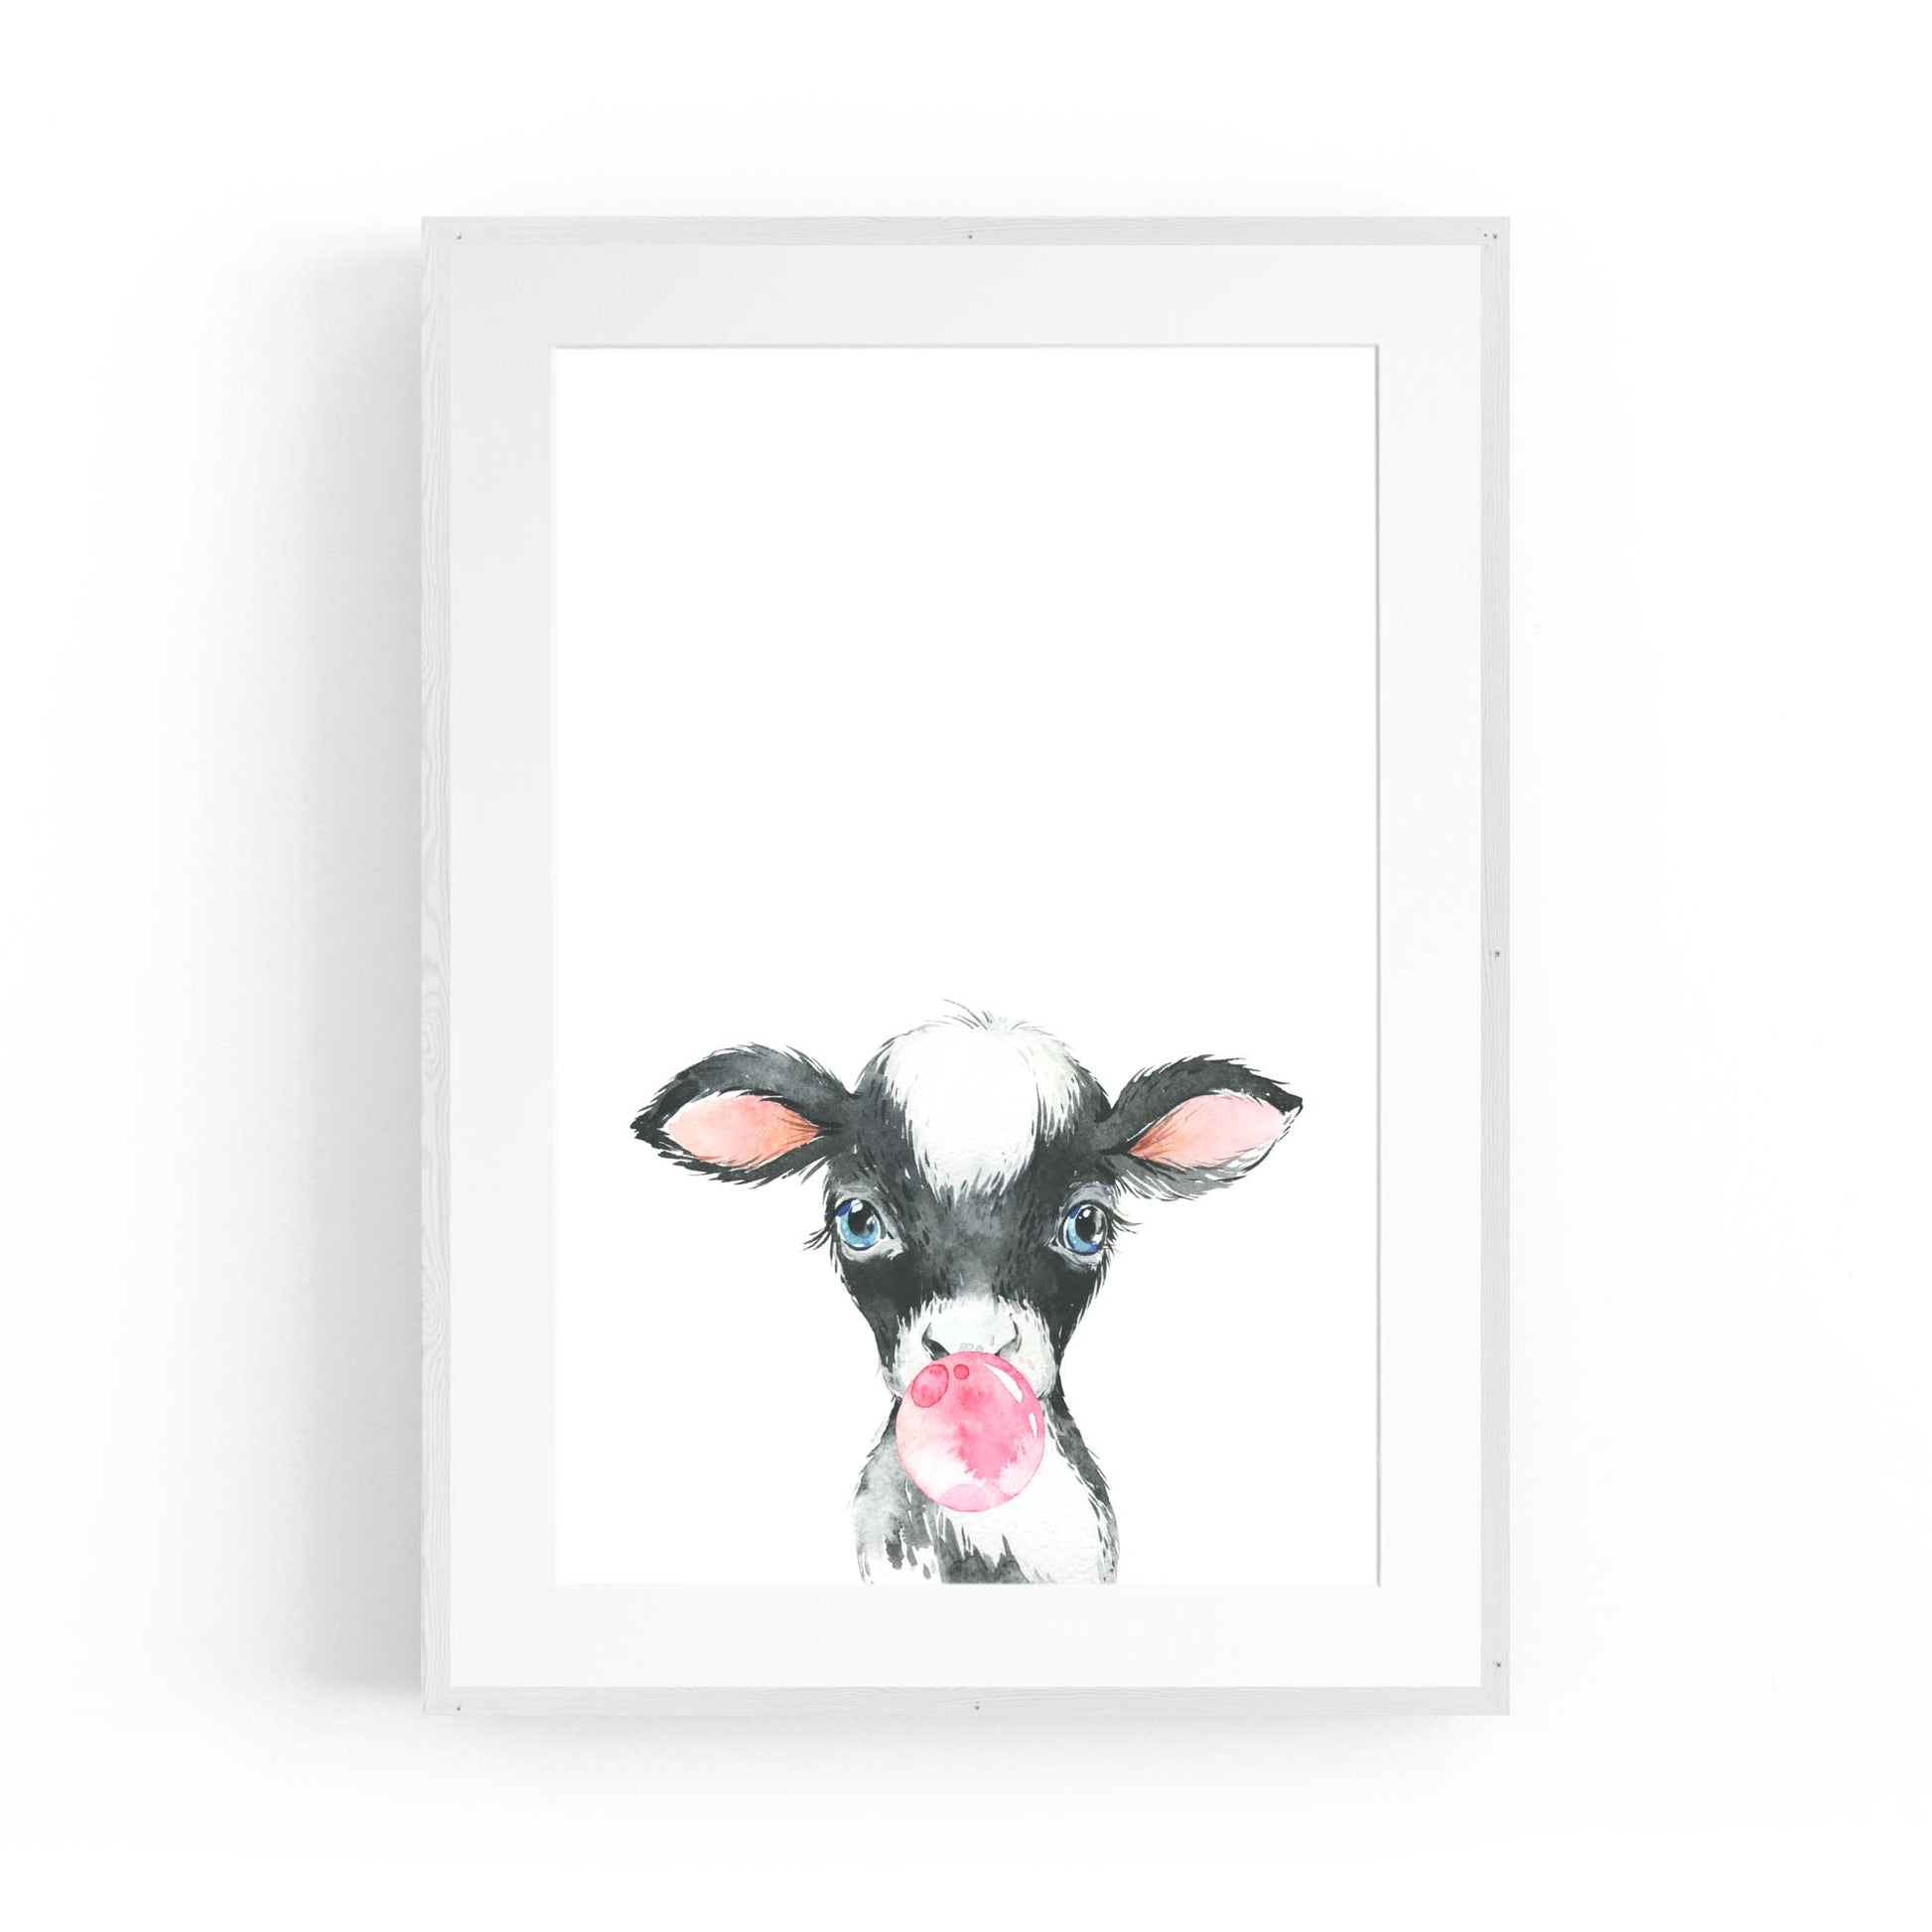 Cute Baby Cow Nursery Animal Gift Wall Art #3 - The Affordable Art Company